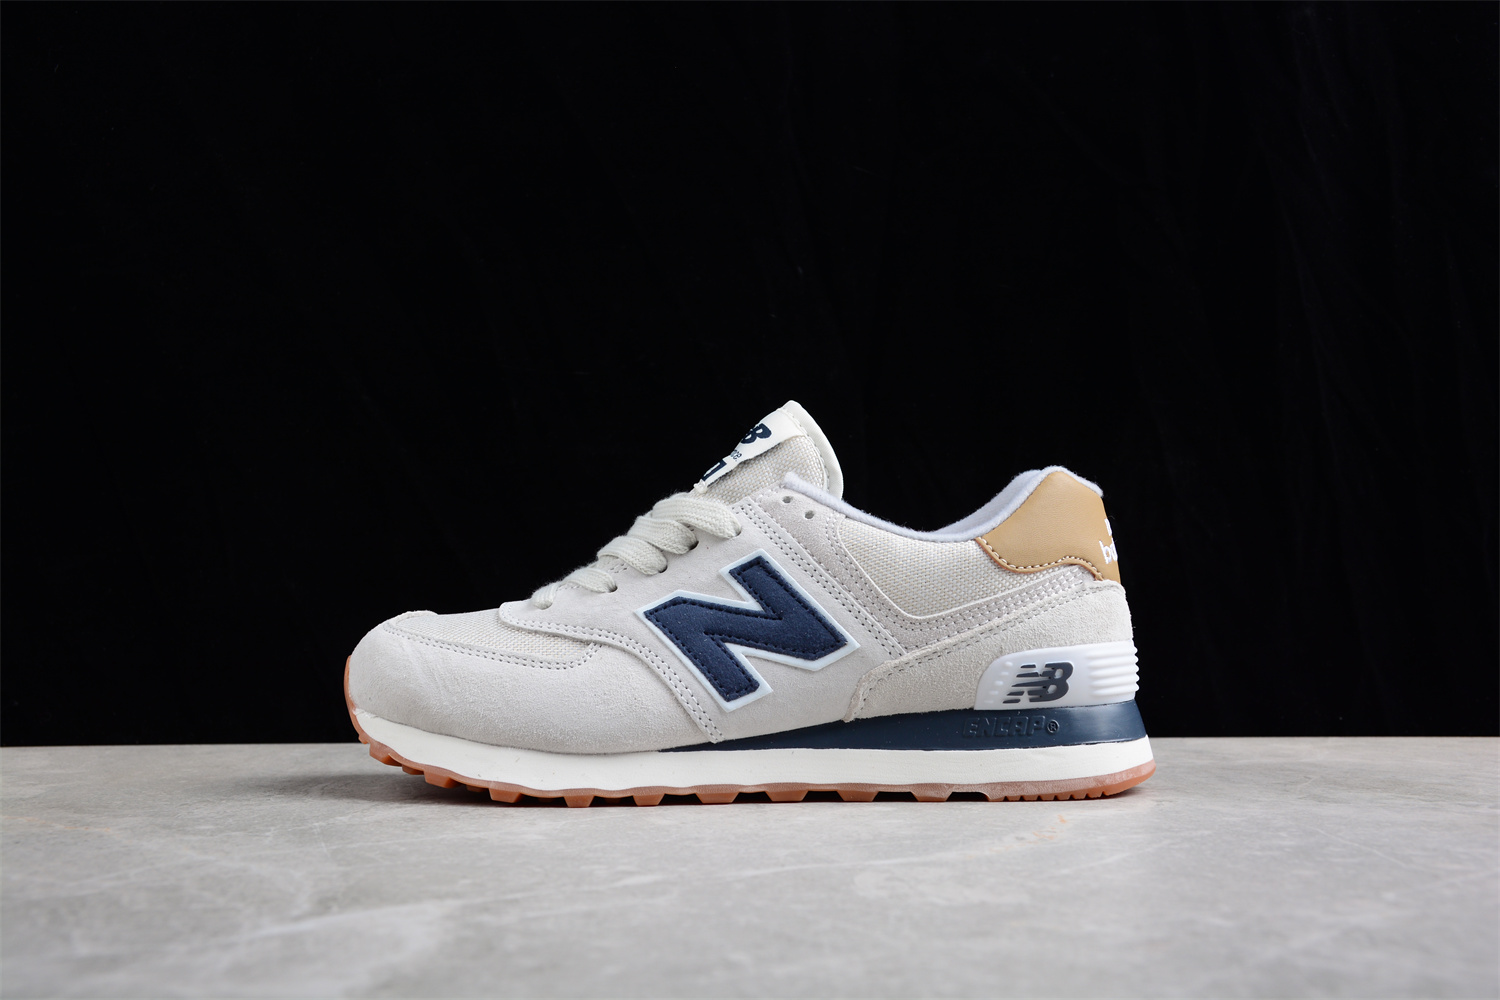 _New Balance_NB_TAW&TOE joint series casual shoes men and women